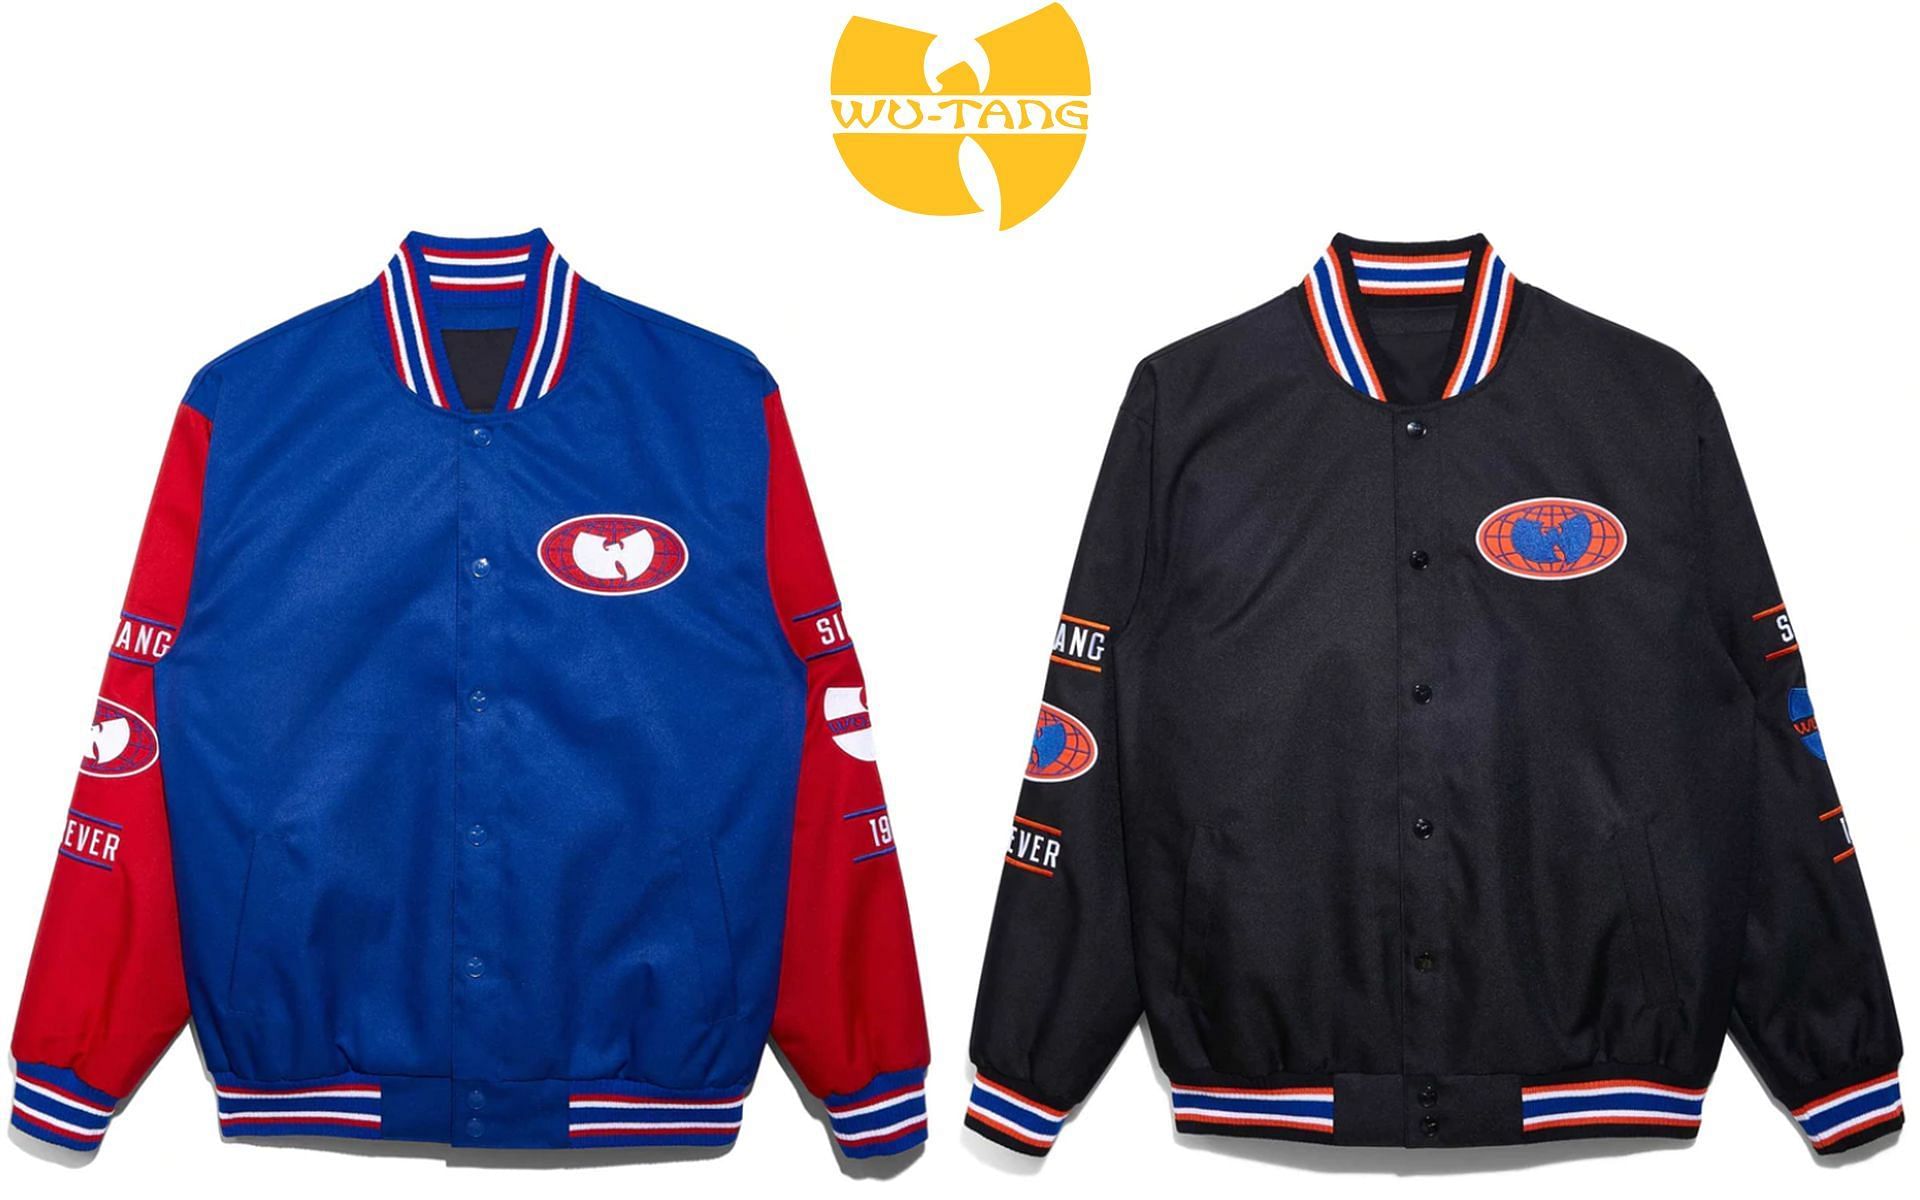 Wu-Tang Clan launched its varsity-style merchandise (Image via Wu-Tang Clan)